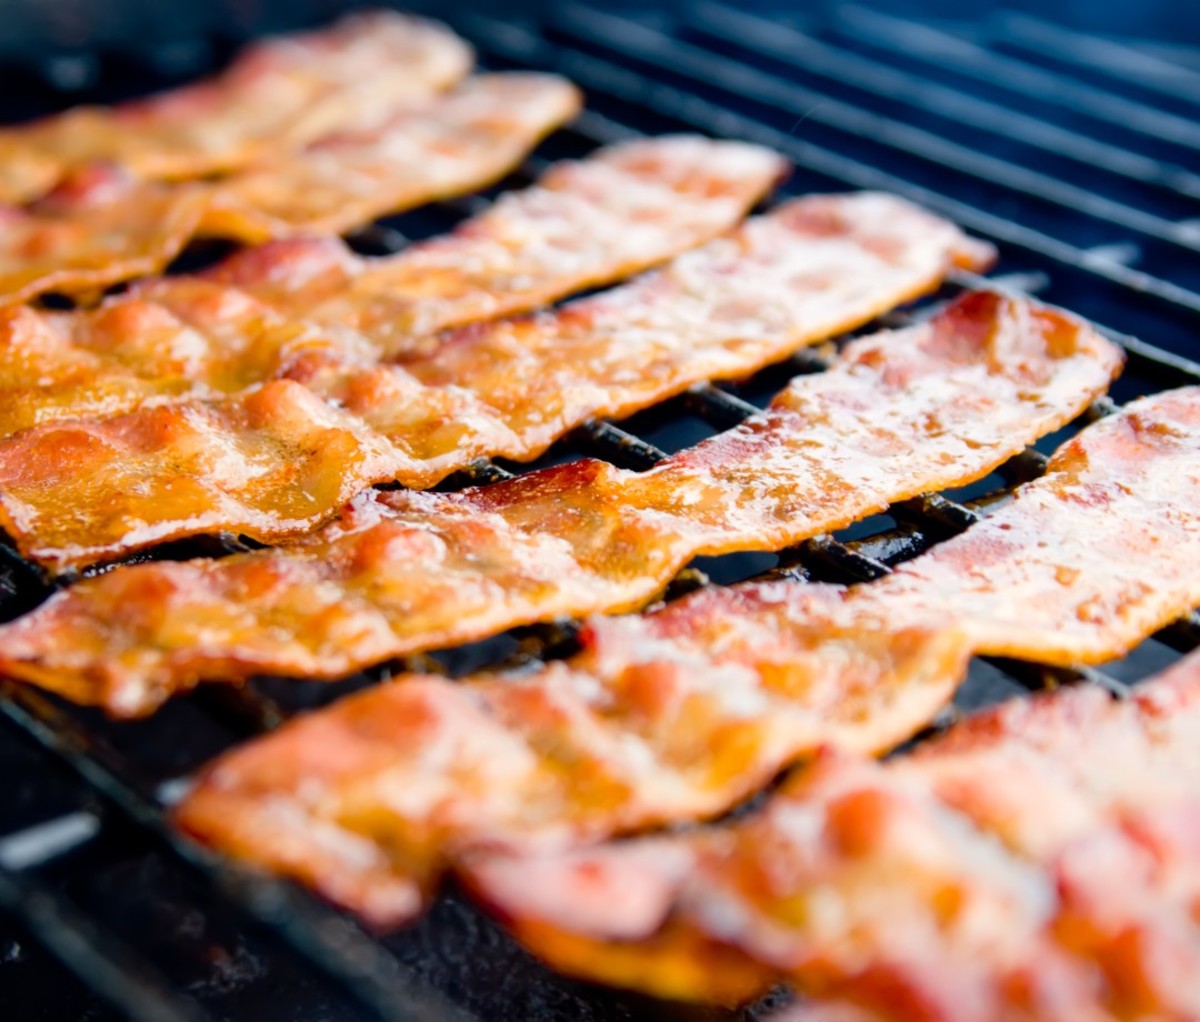 Bacon on grill